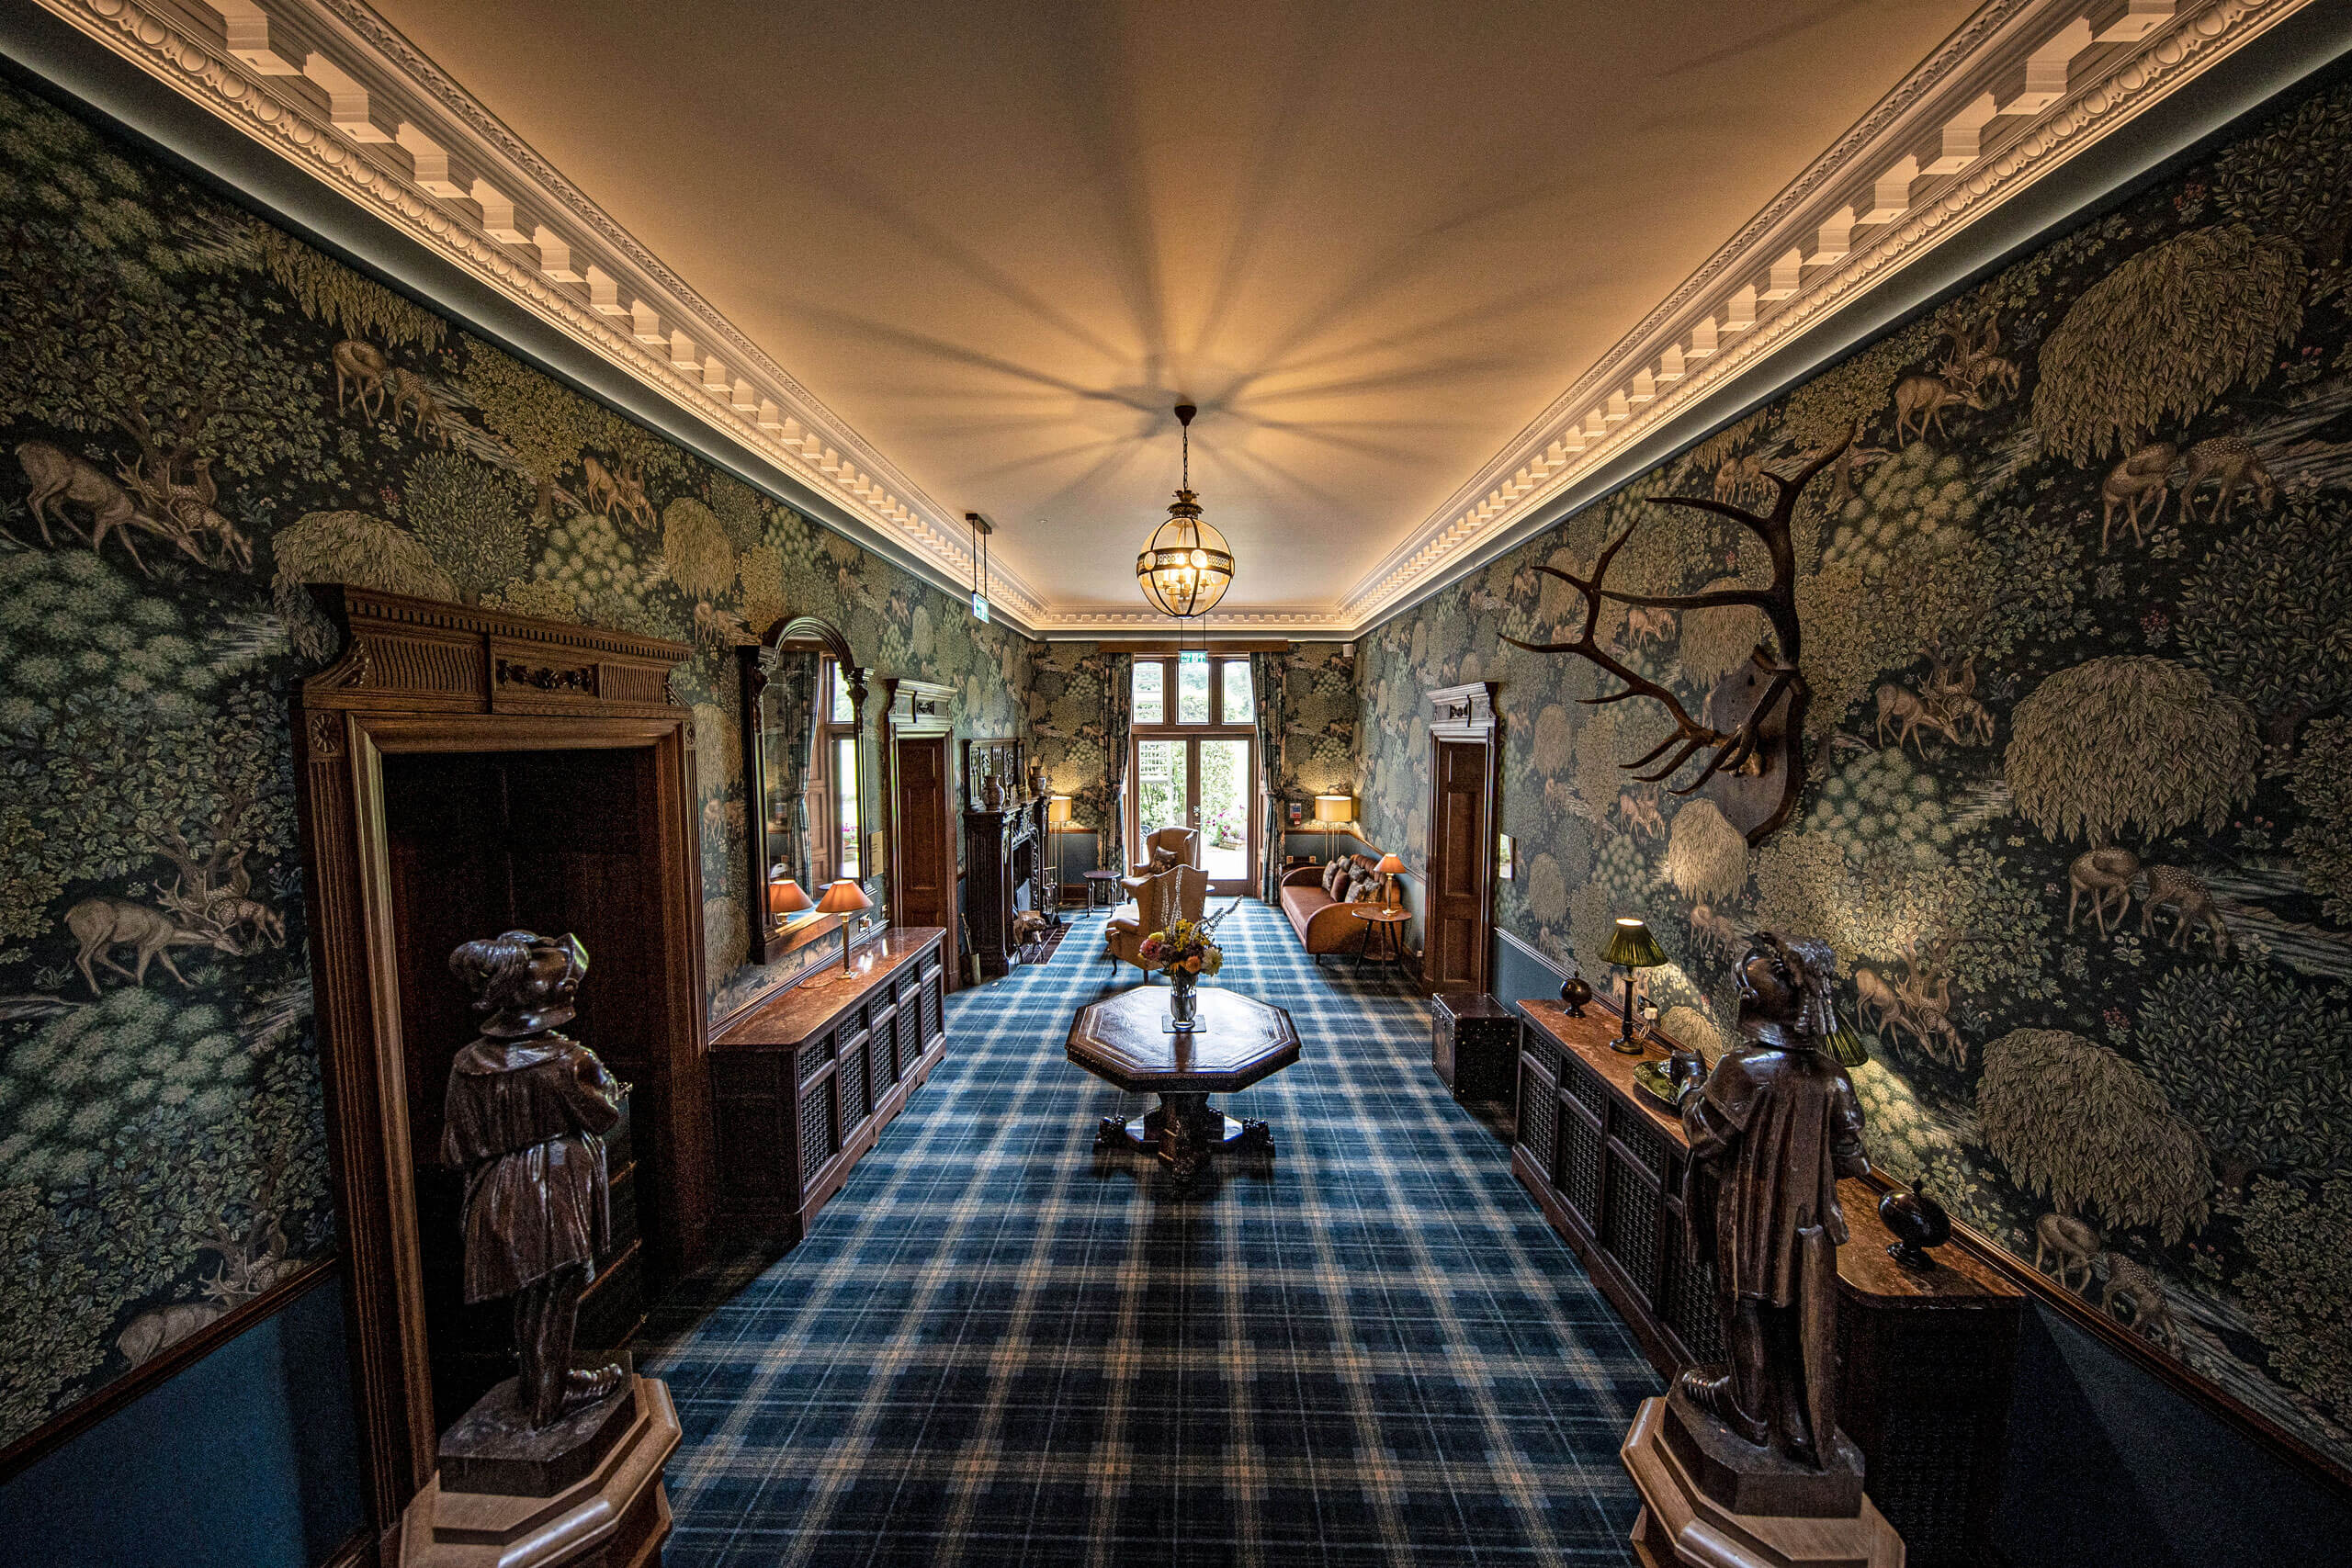 A room with a blue plaid carpet and a table with statues